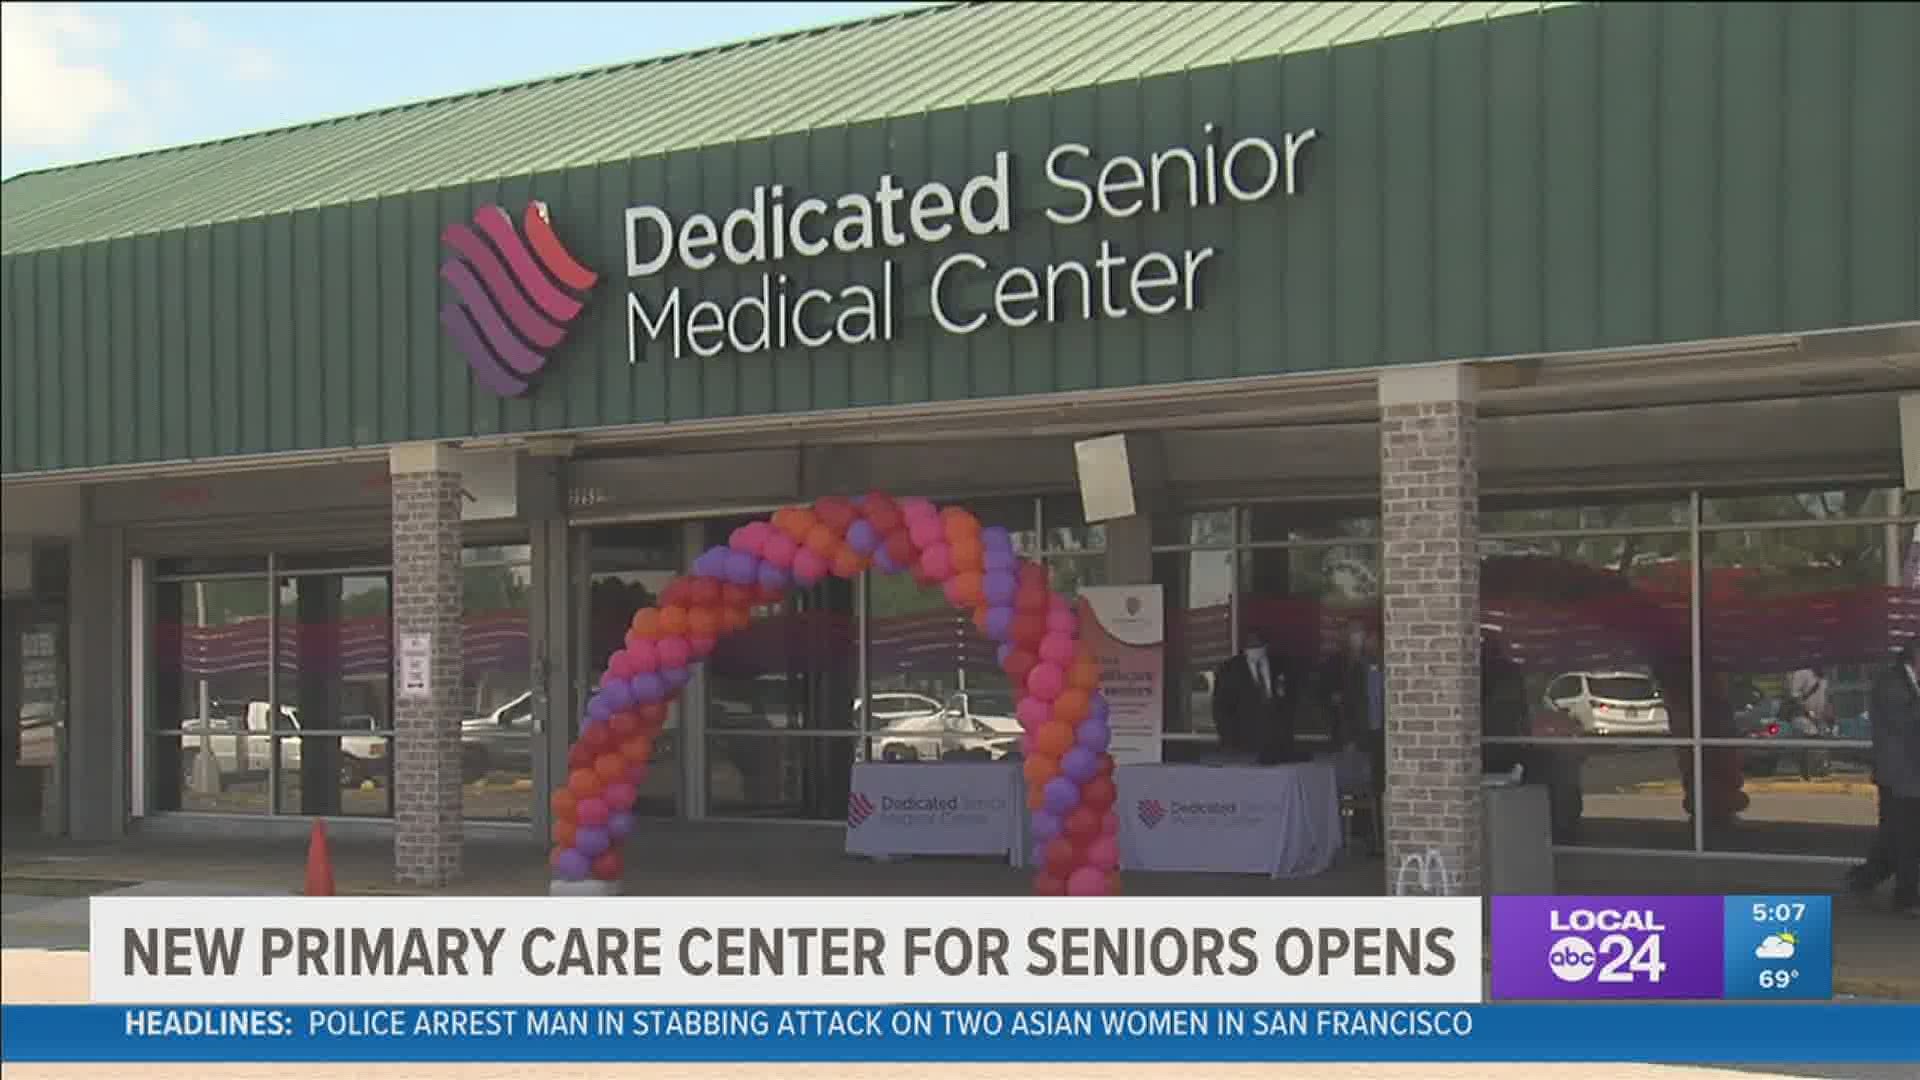 This location brings affordable primary care personalized for older citizens, especially those with multiple and major health challenges.